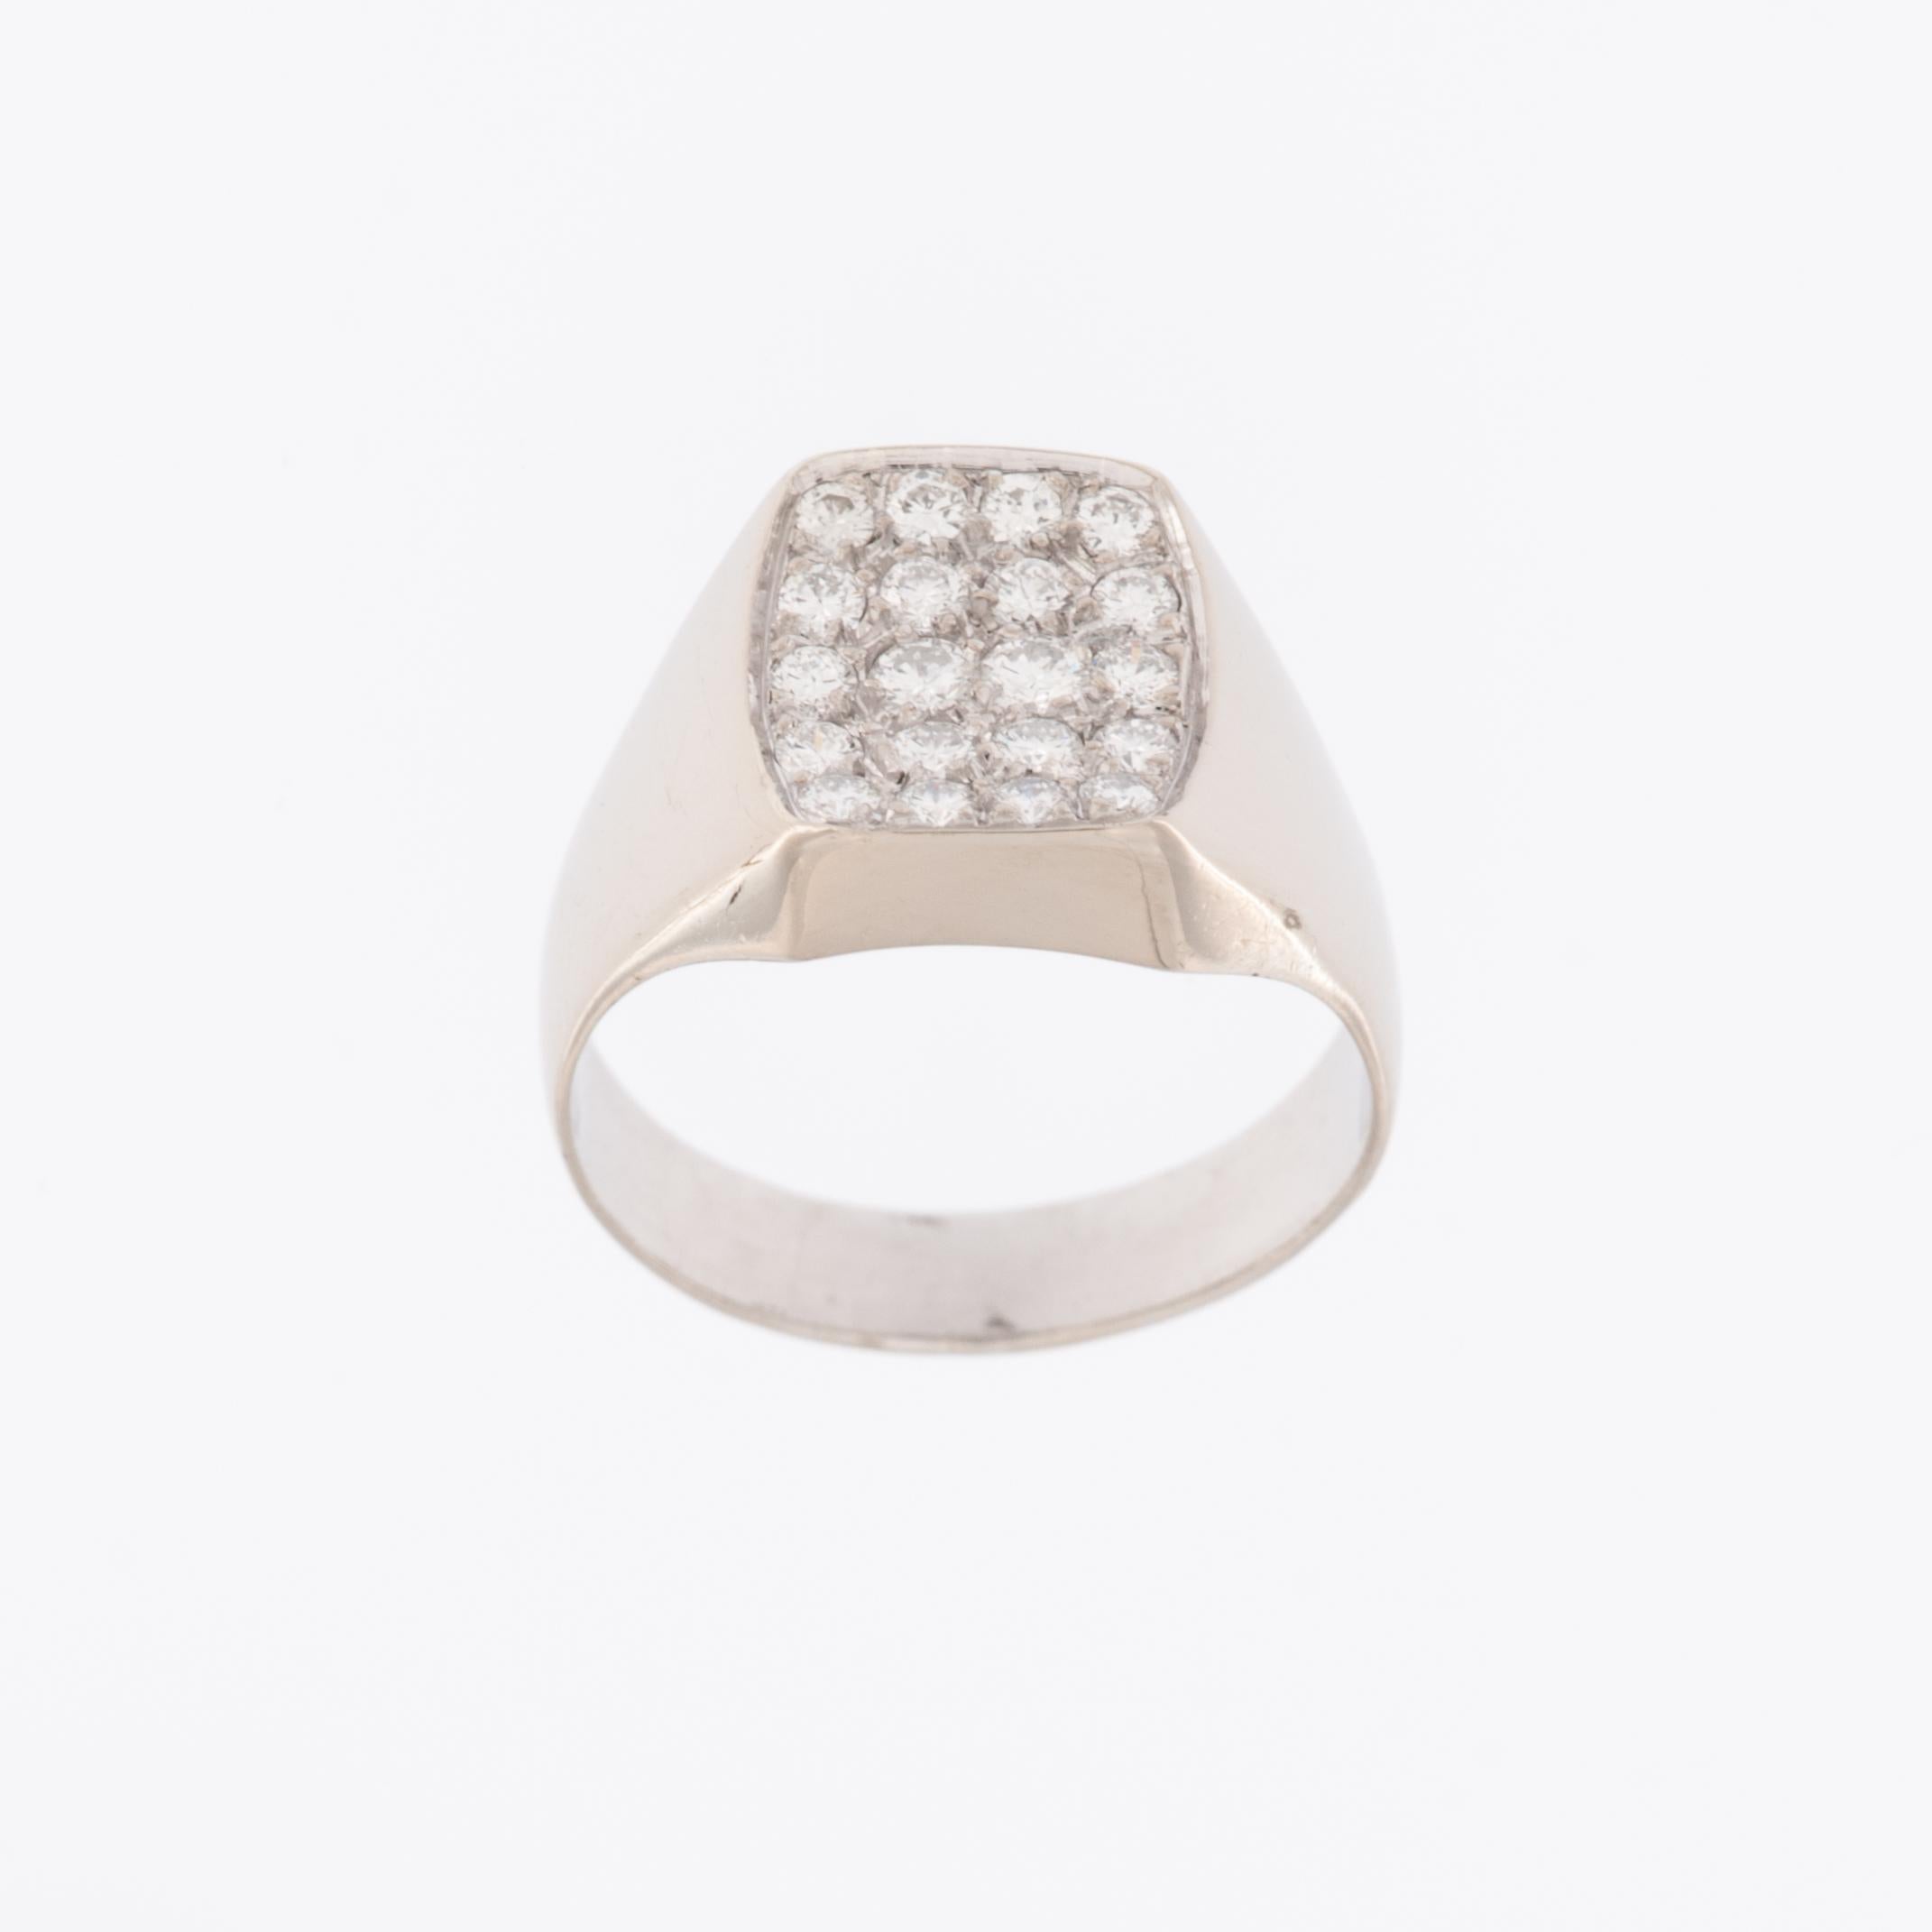 The German 18kt White Gold Signet Ring with Diamonds is a luxurious and stylish piece of jewelry that combines the classic elegance of white gold with the sparkling beauty of diamonds. 

The ring is crafted from 18-karat white gold, a high-quality